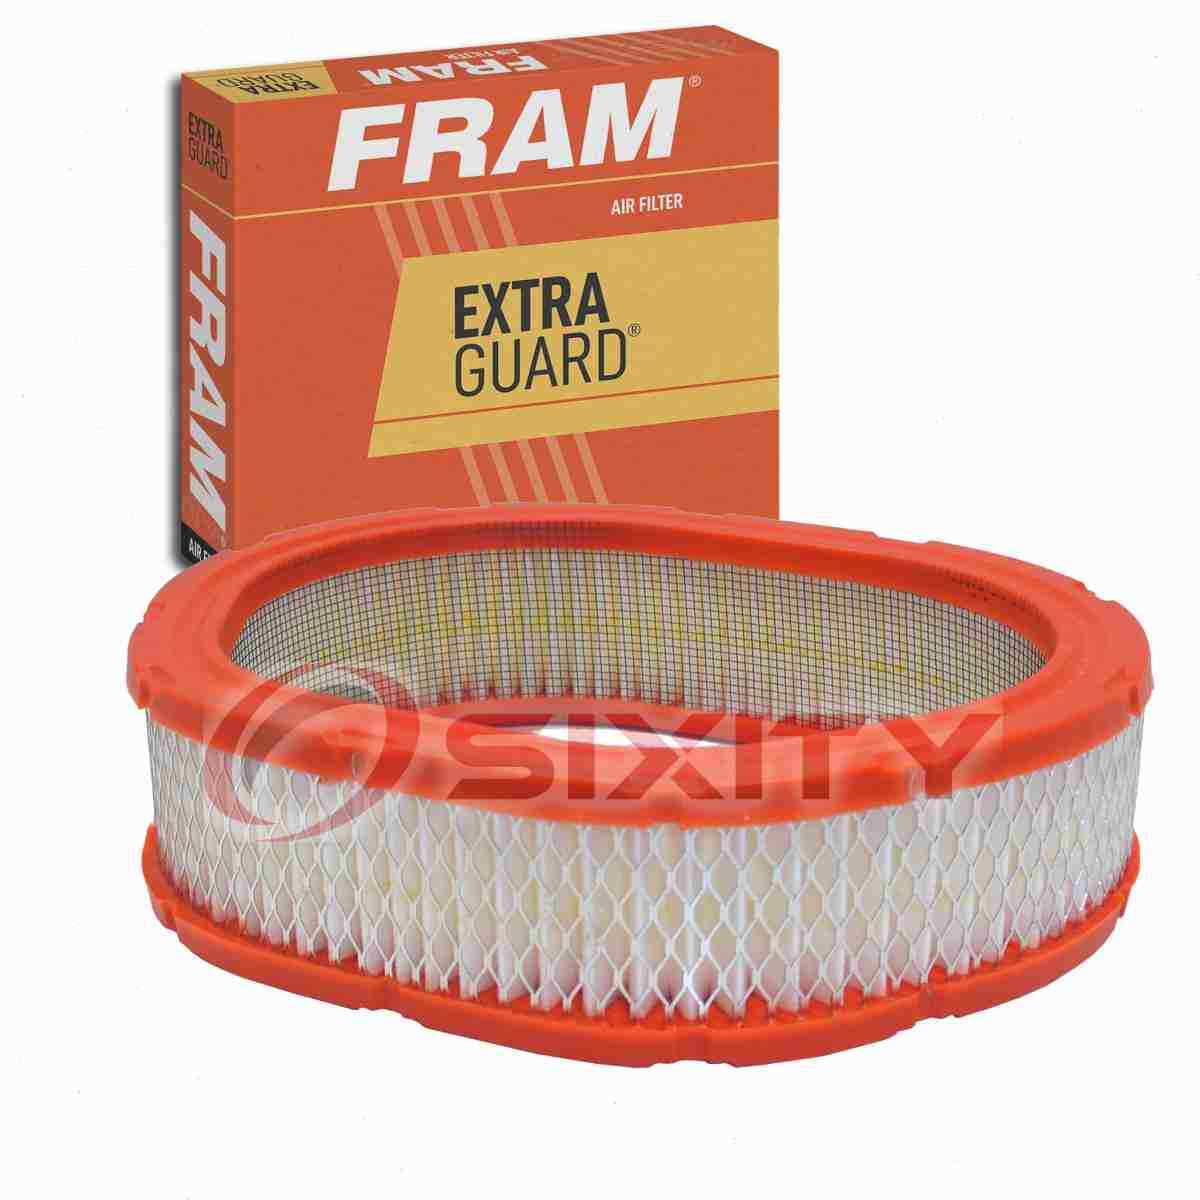 FRAM Extra Guard Air Filter for 1986-1989 Plymouth Reliant Intake Inlet mz